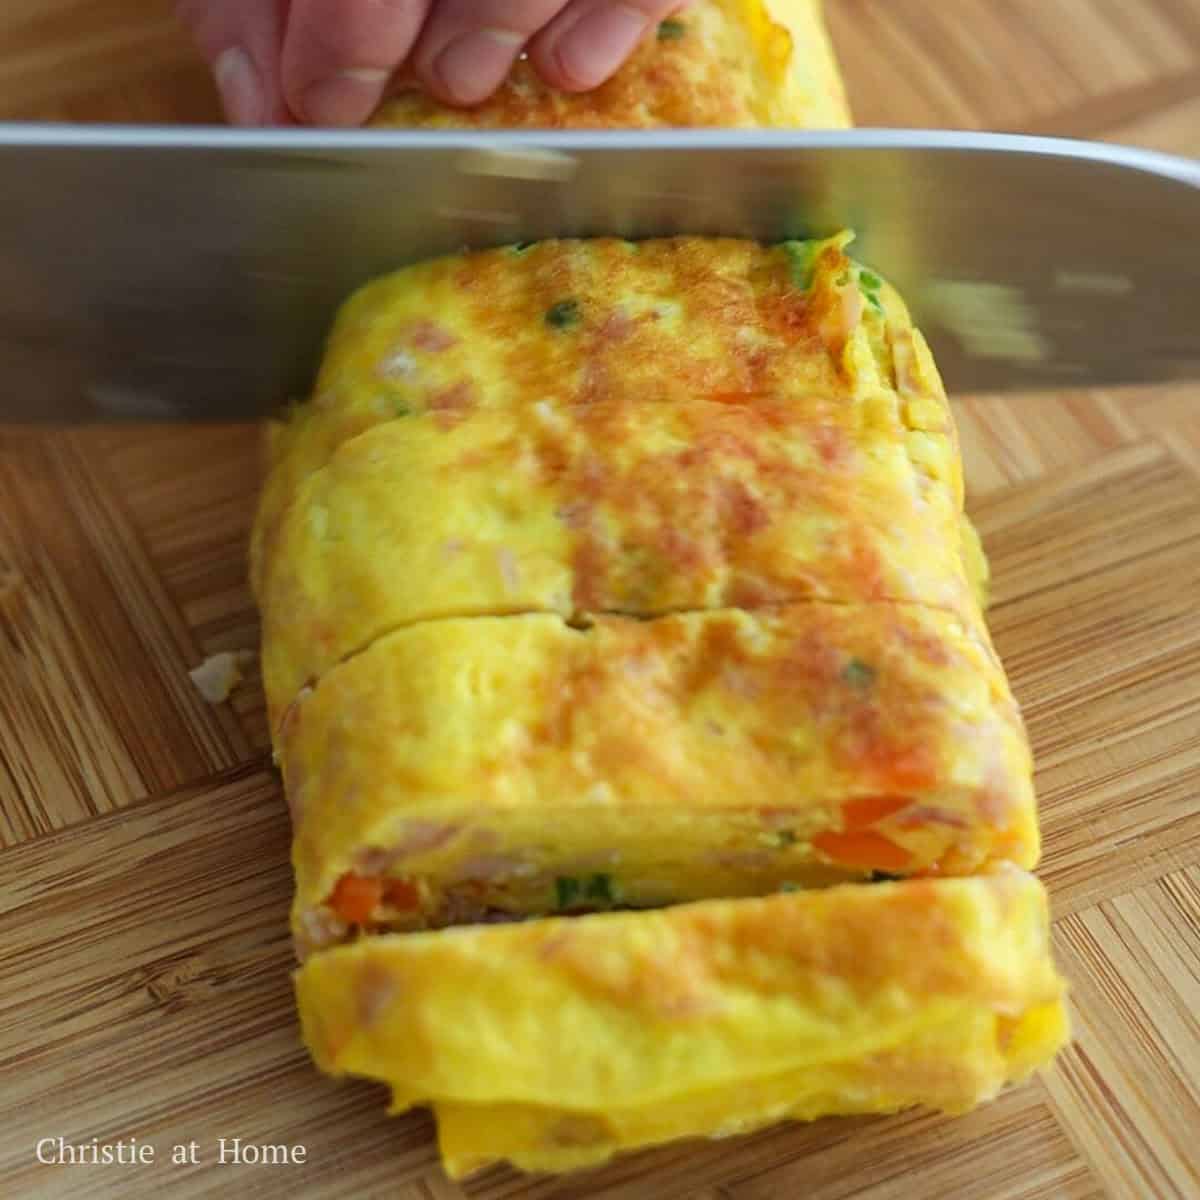 slice rolled omelette into pieces